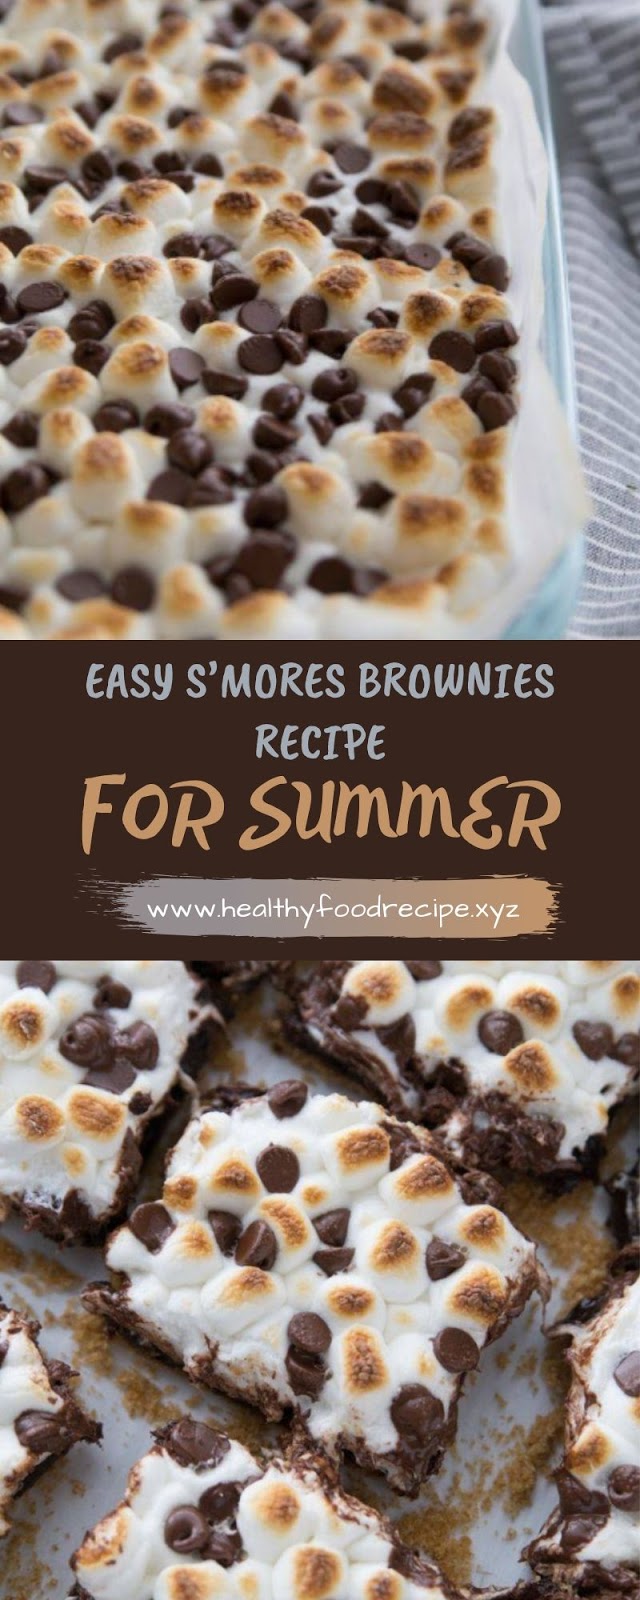 EASY S’MORES BROWNIES RECIPE FOR SUMMER